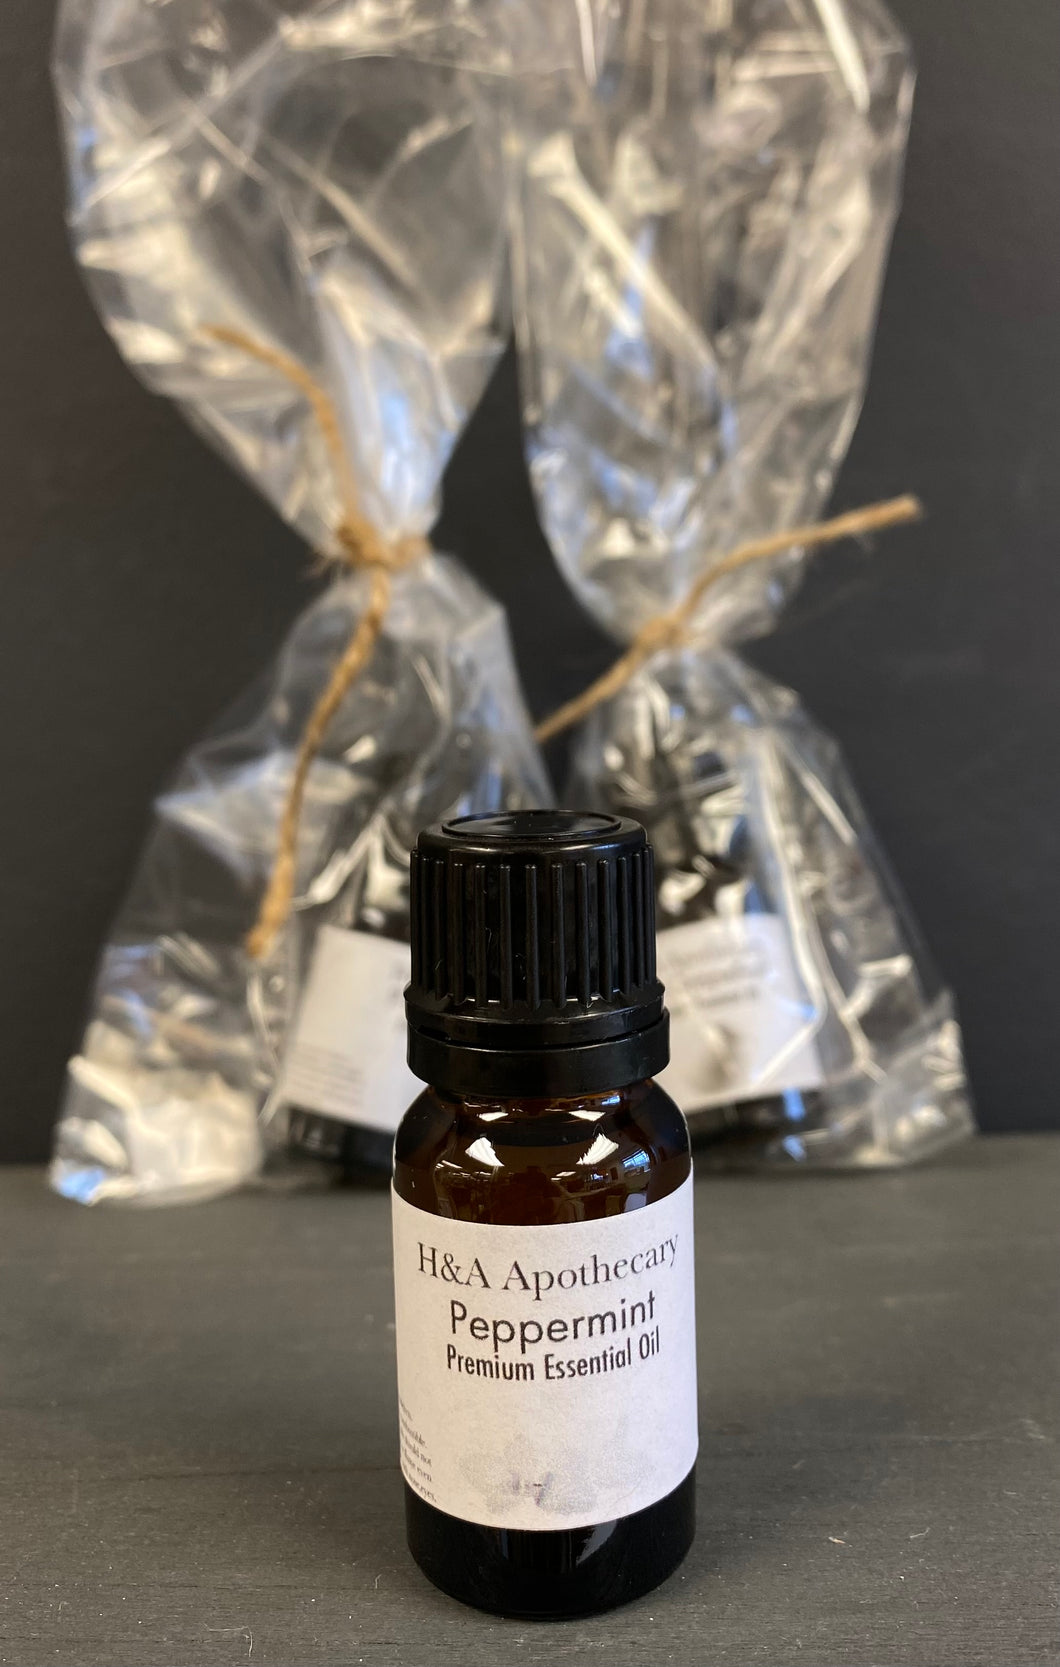 H&A Apothecary Premium Peppermint Essential Oil